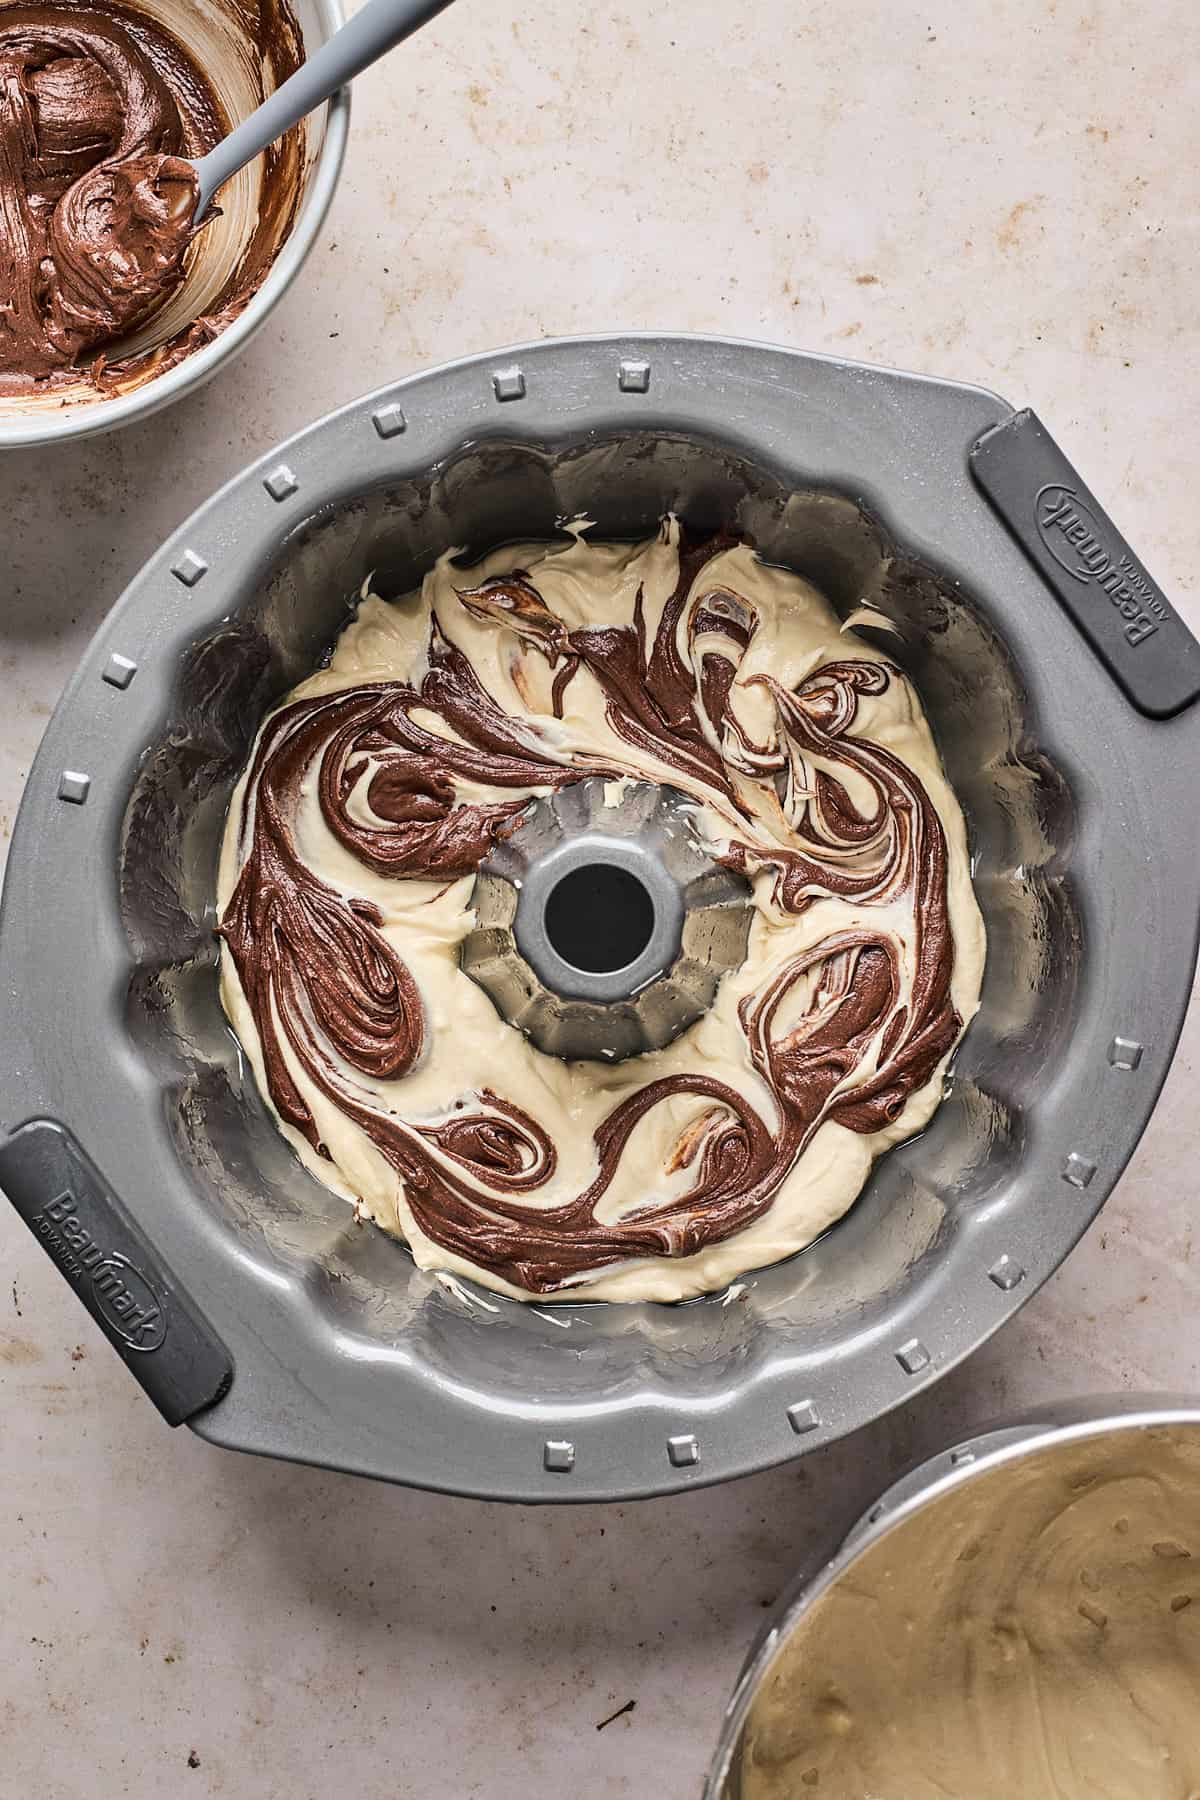 pound cake being assembled in a bundt pan